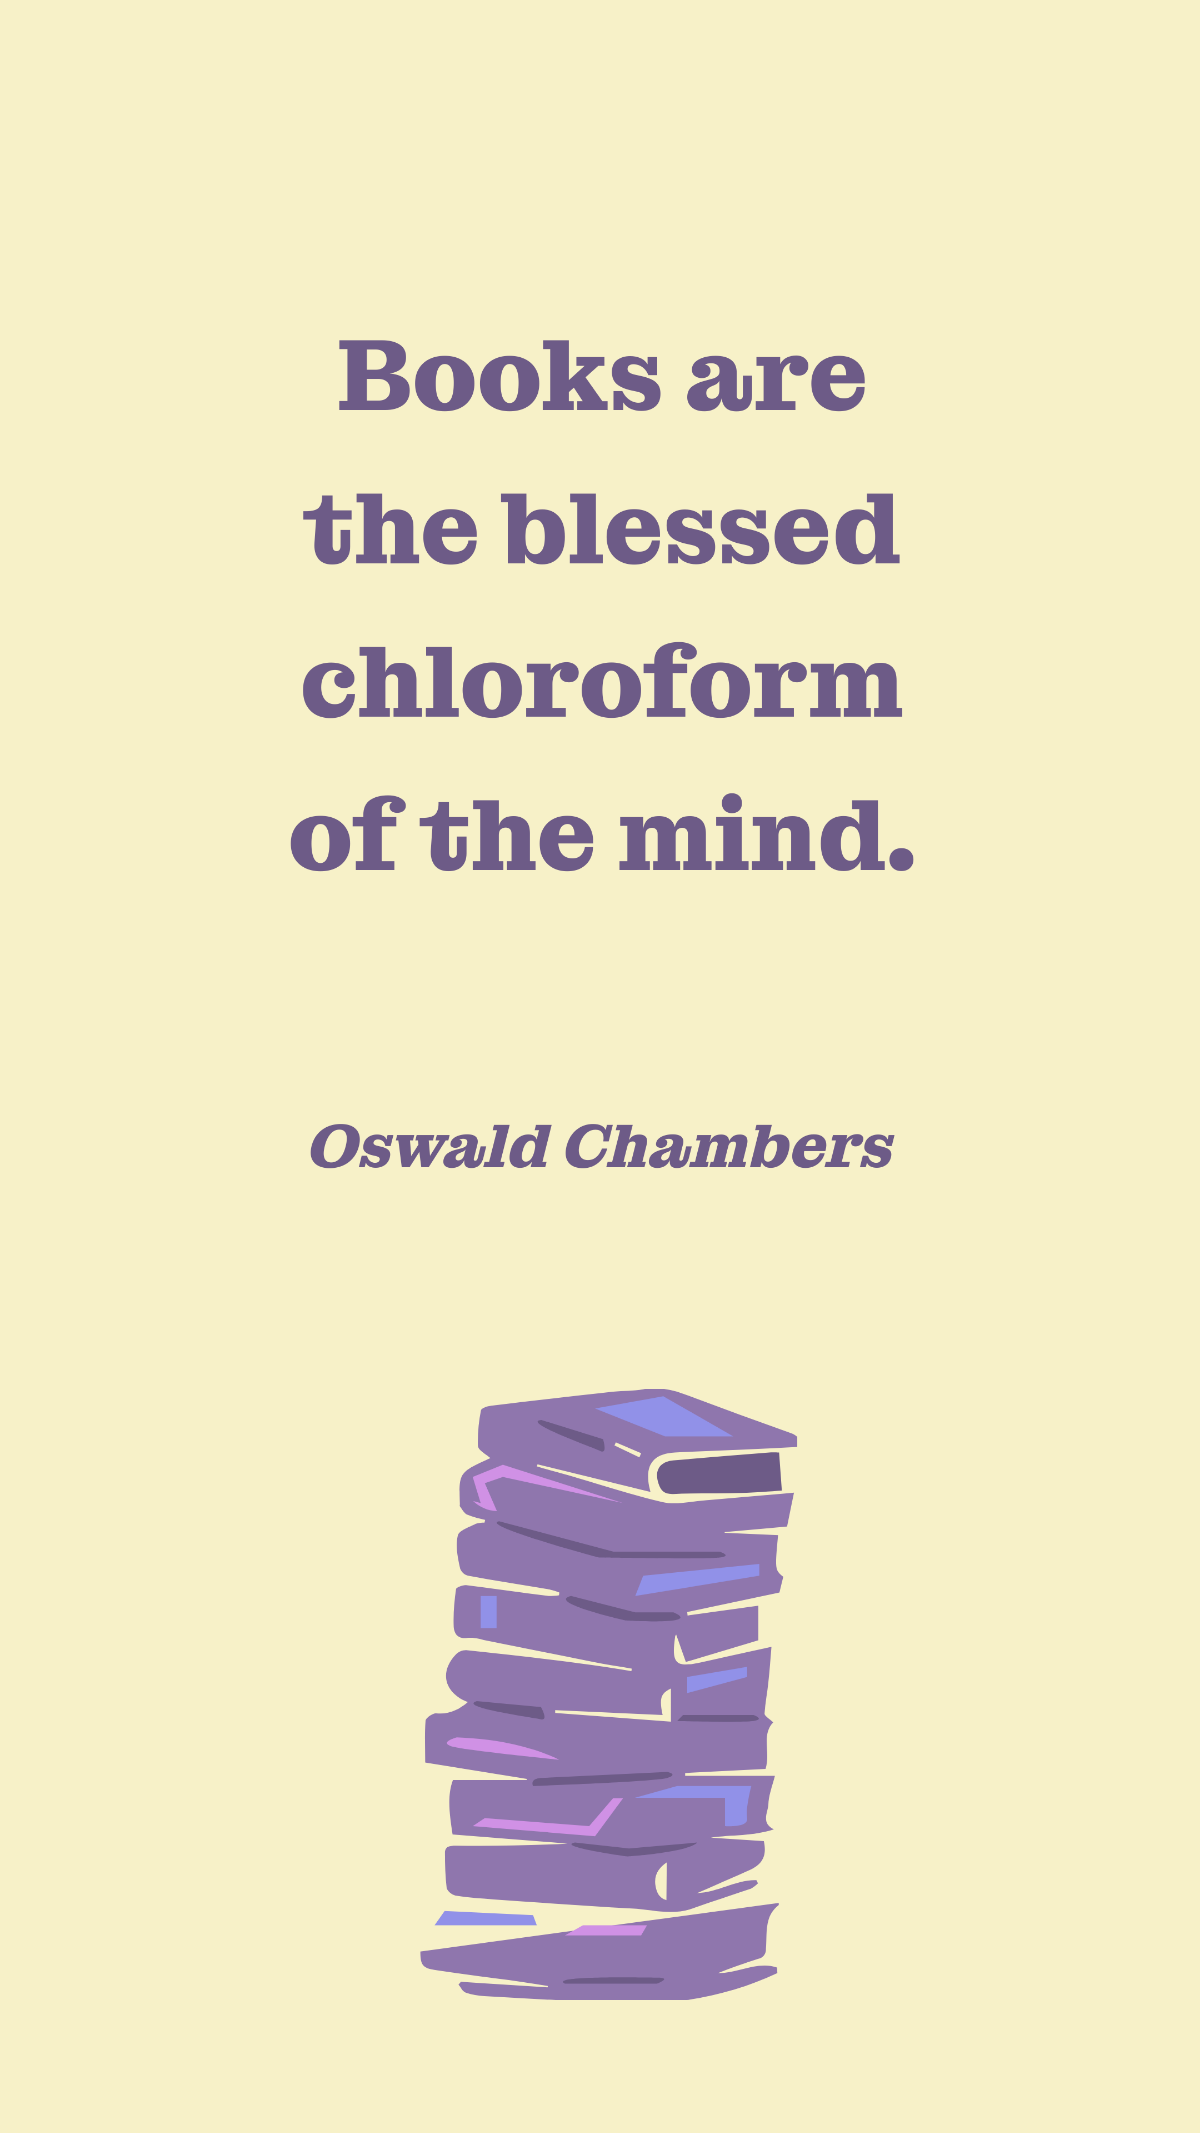 Oswald Chambers - Books are the blessed chloroform of the mind. Template